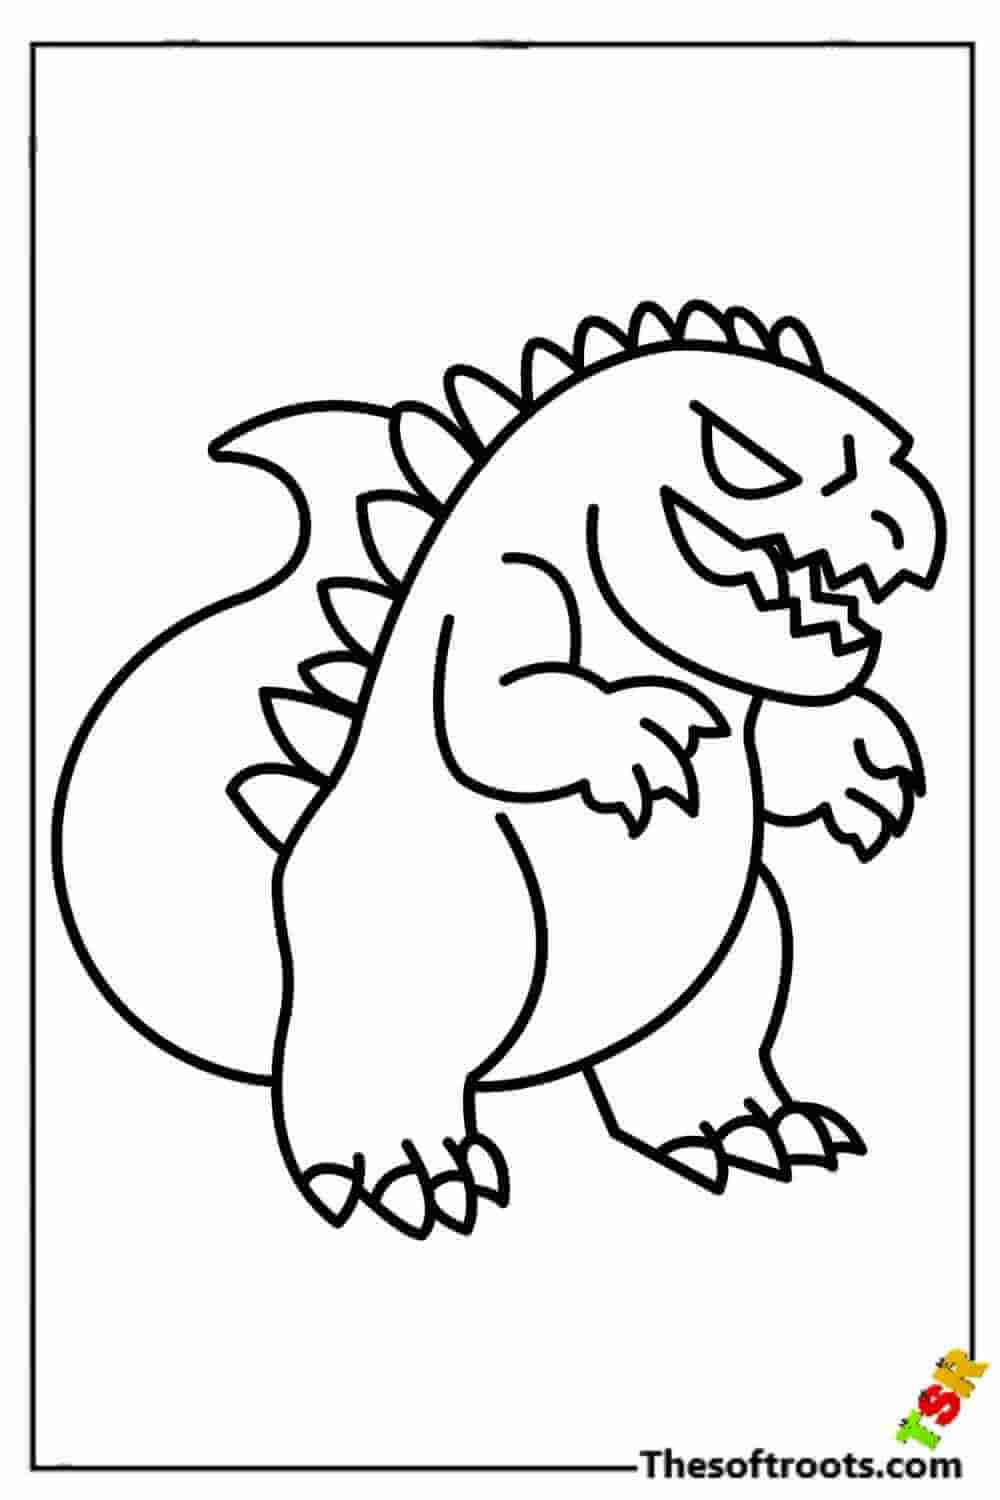 space godzilla coloring pages